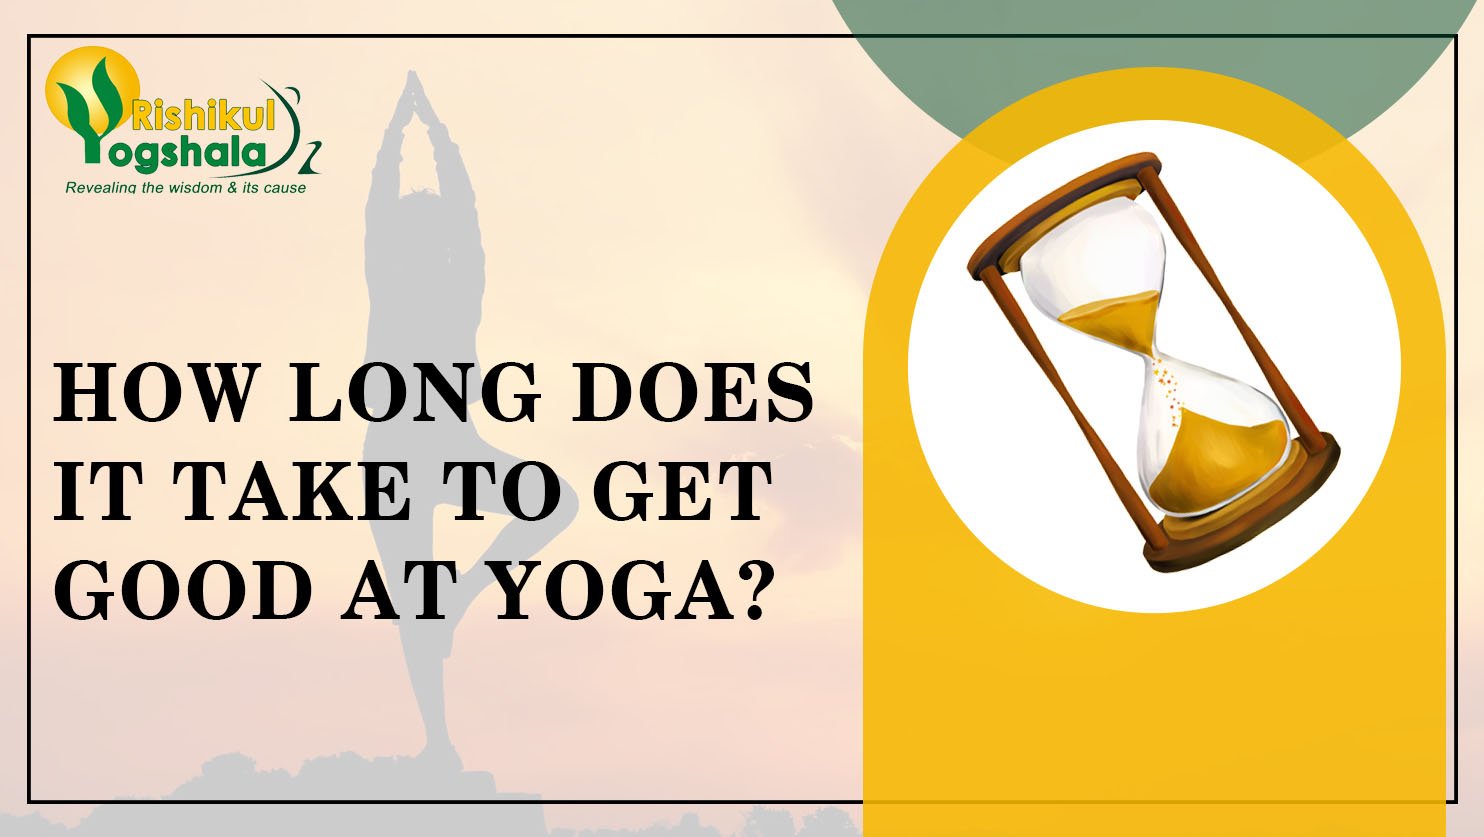 How Long Does It Take To Get Good At Yoga?